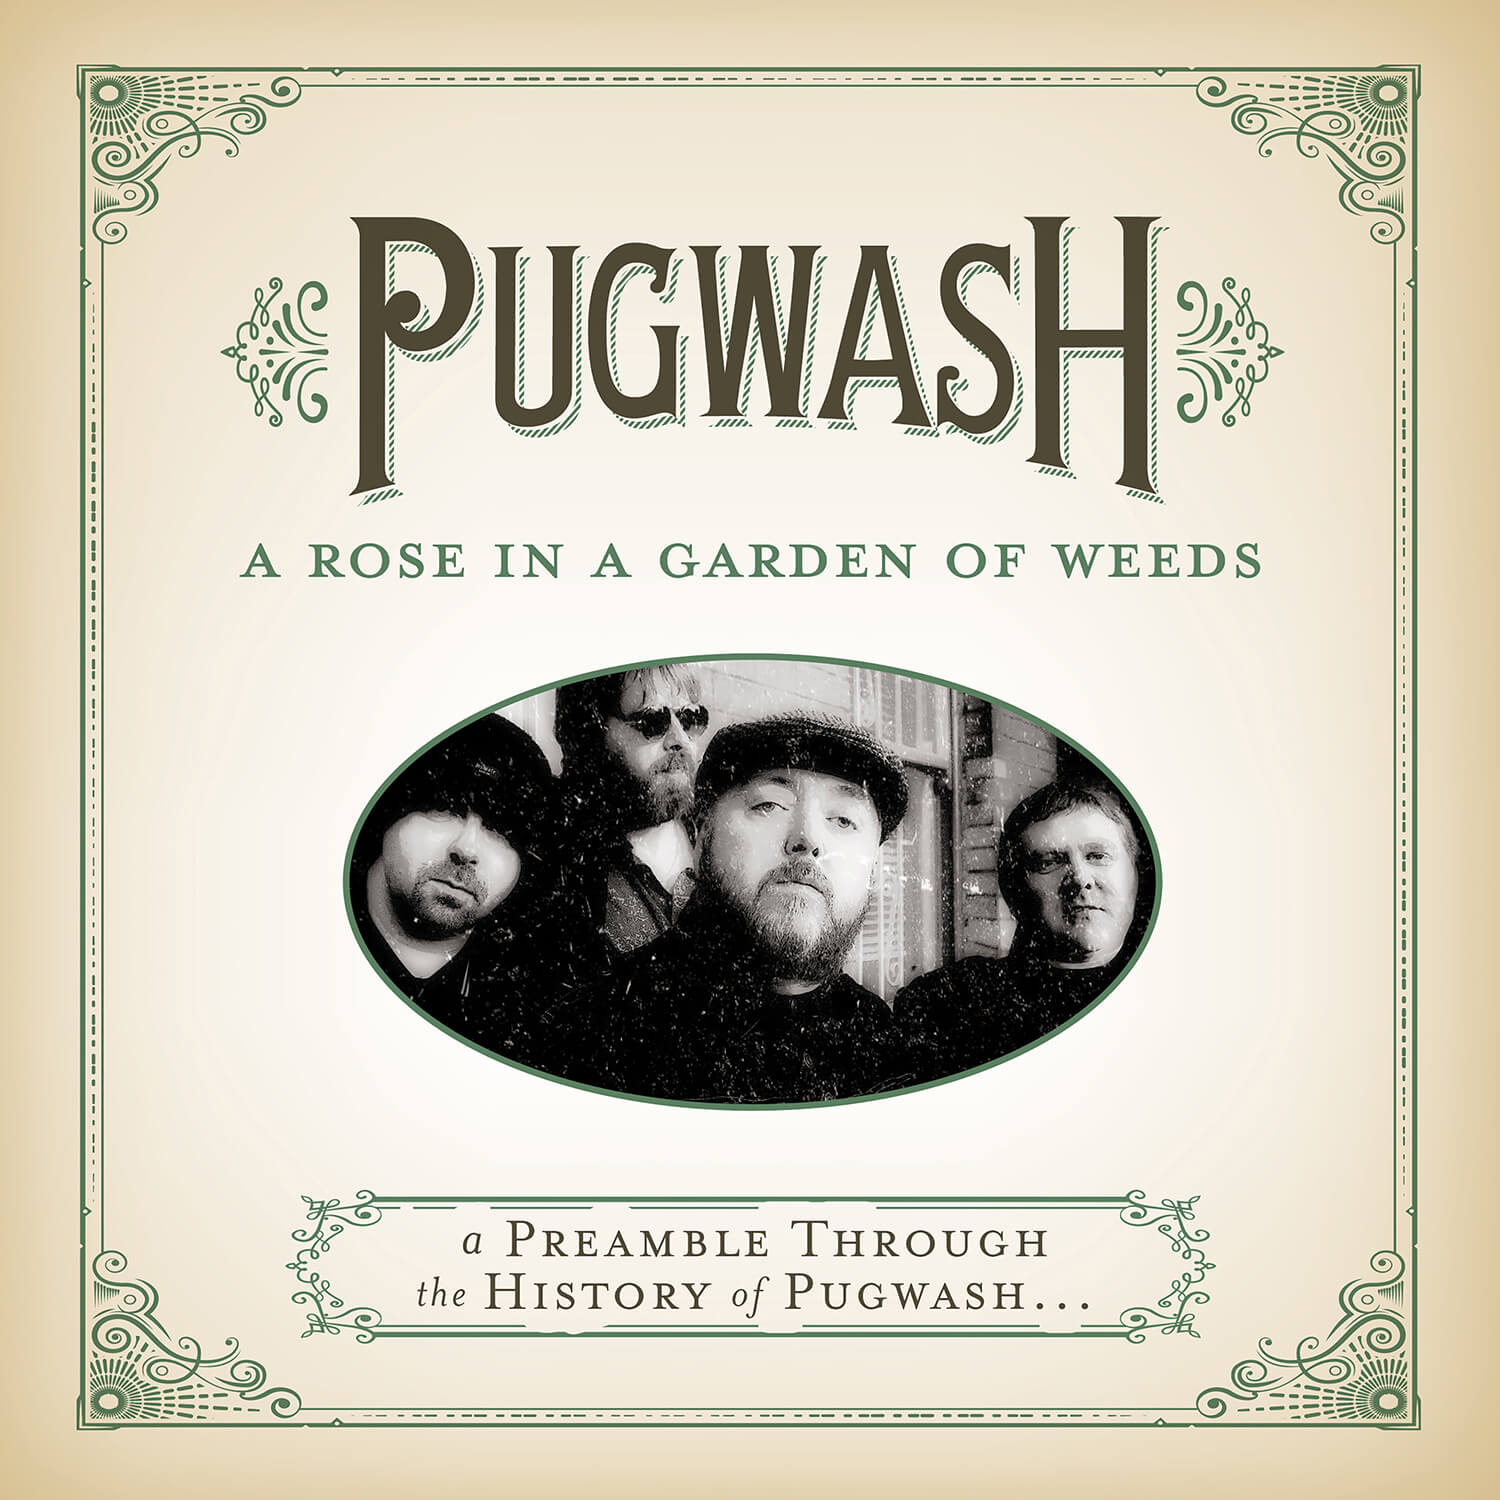 A Rose In A Garden Of Weeds: A Preamble Through The History Of Pugwash…